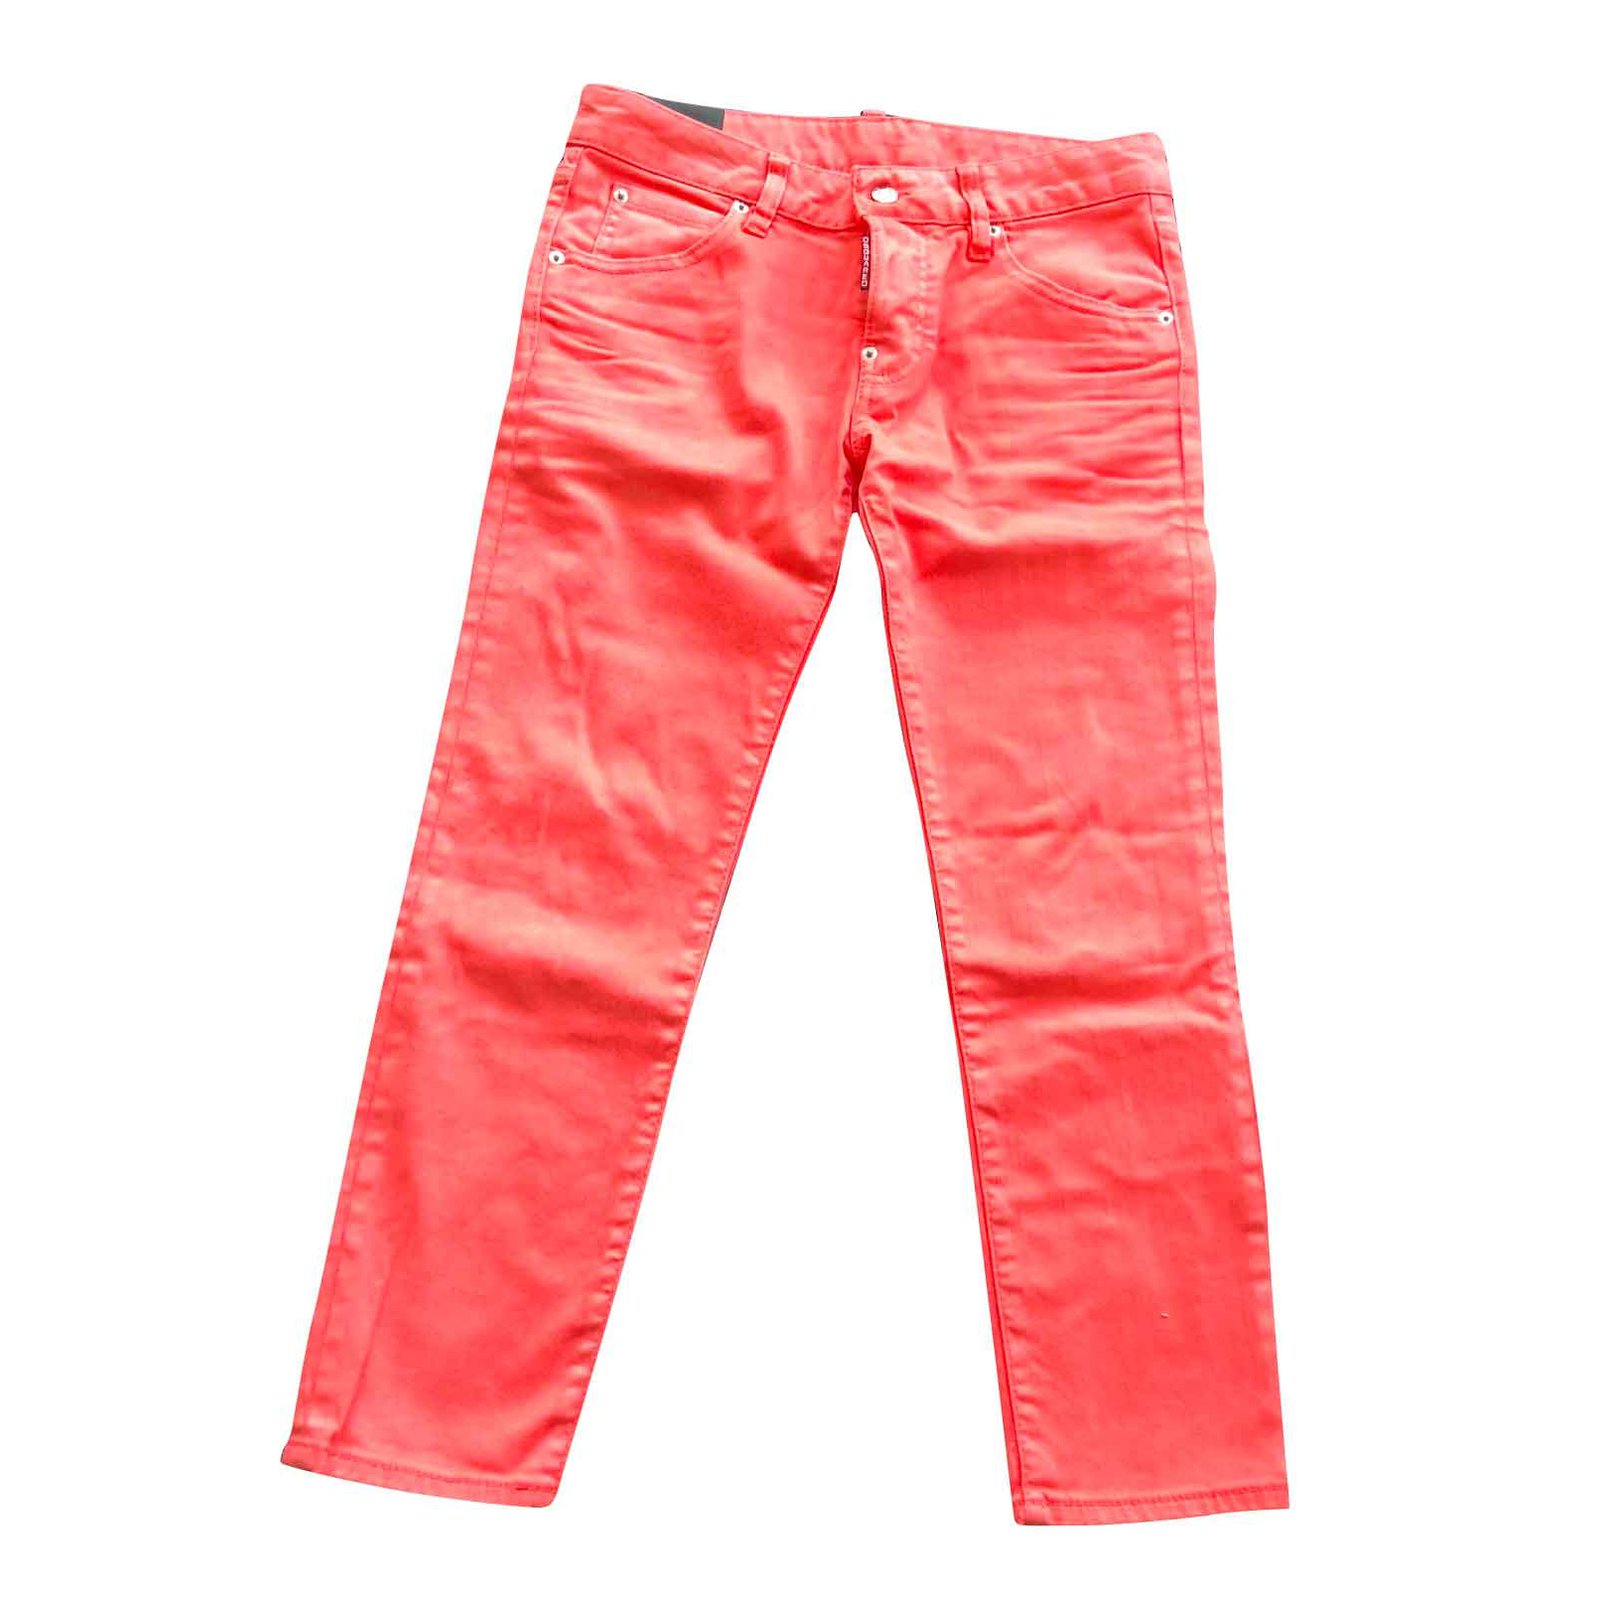 coral brand jeans